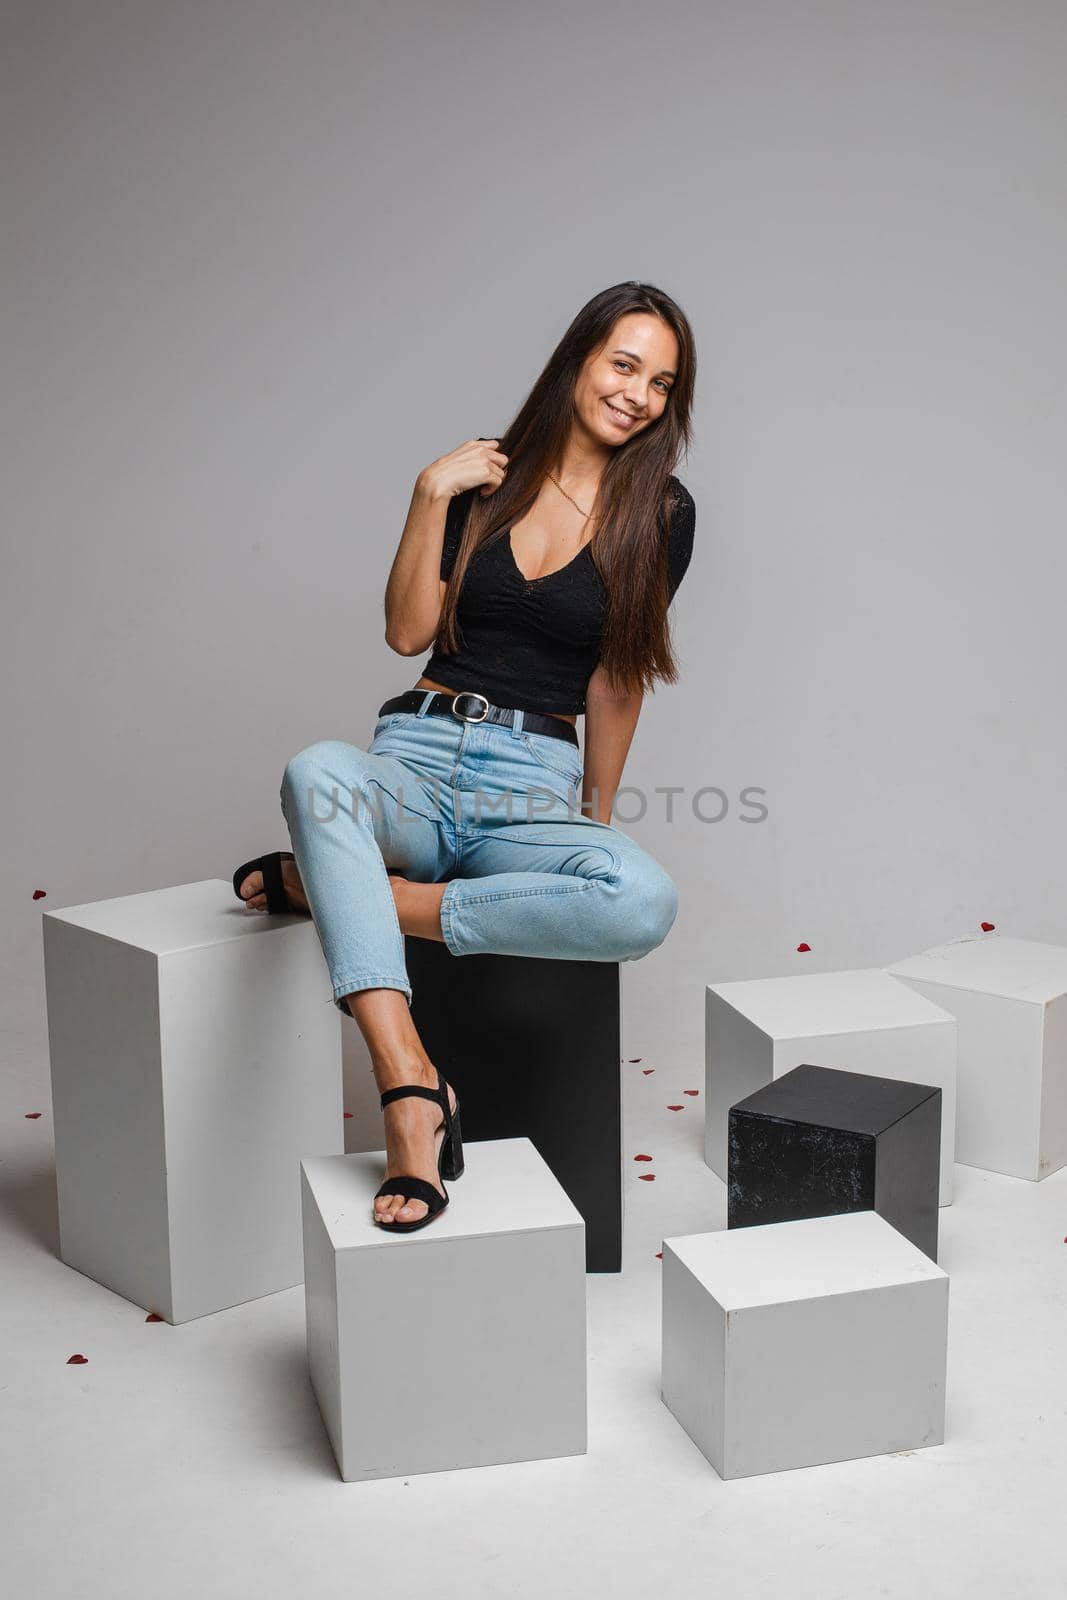 beautiufl caucasian woman with charming appearance sits on a white cube and looks to te camera, picture isolated on white background